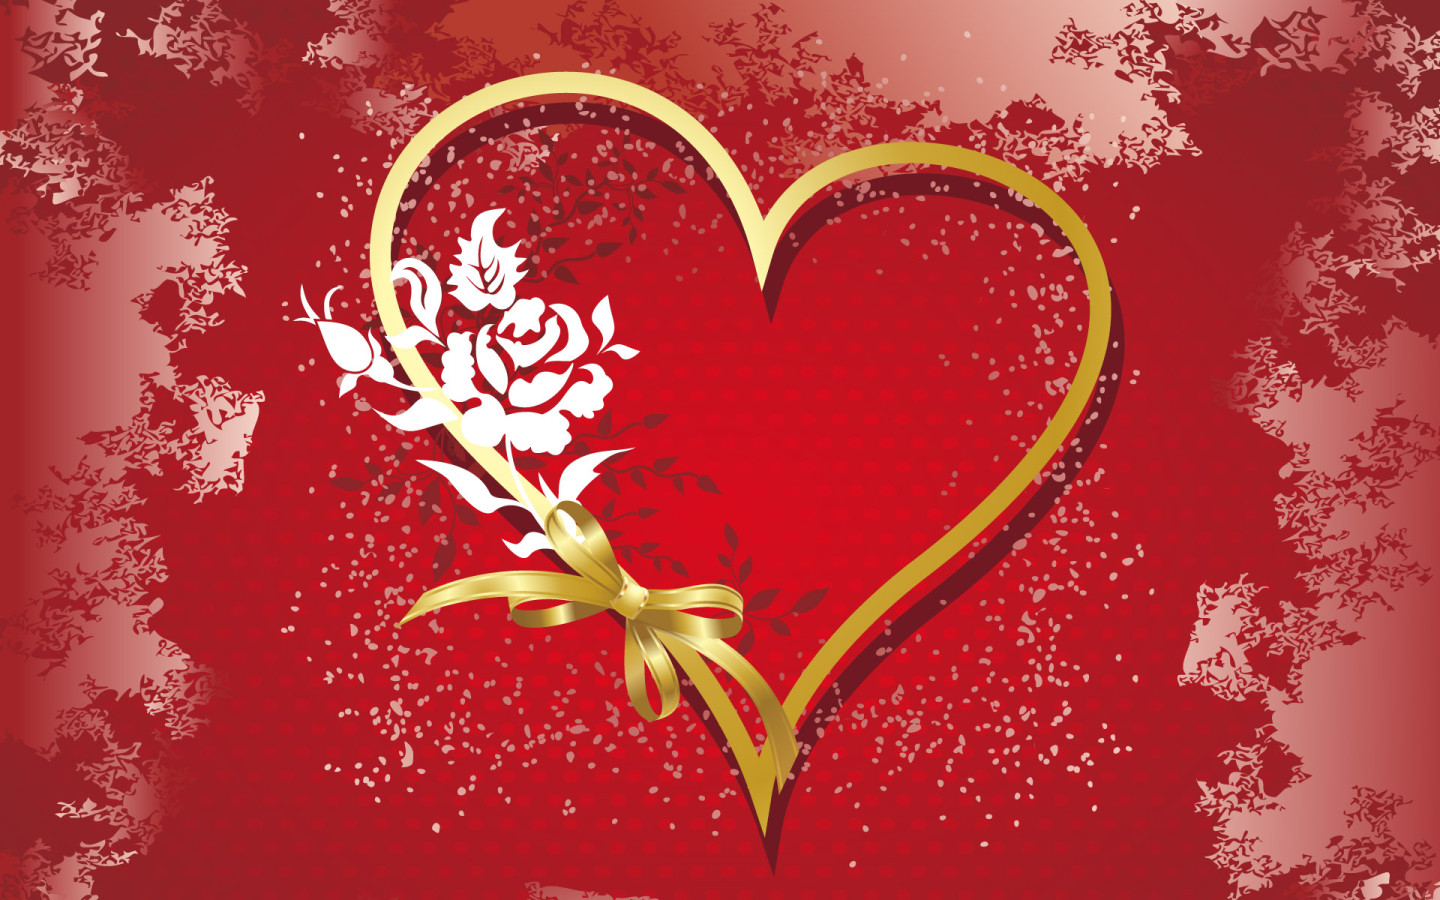 Valentines Day 2014 - Cards,Wallpapers HD,Gifts,Chocolates,Photos and ...